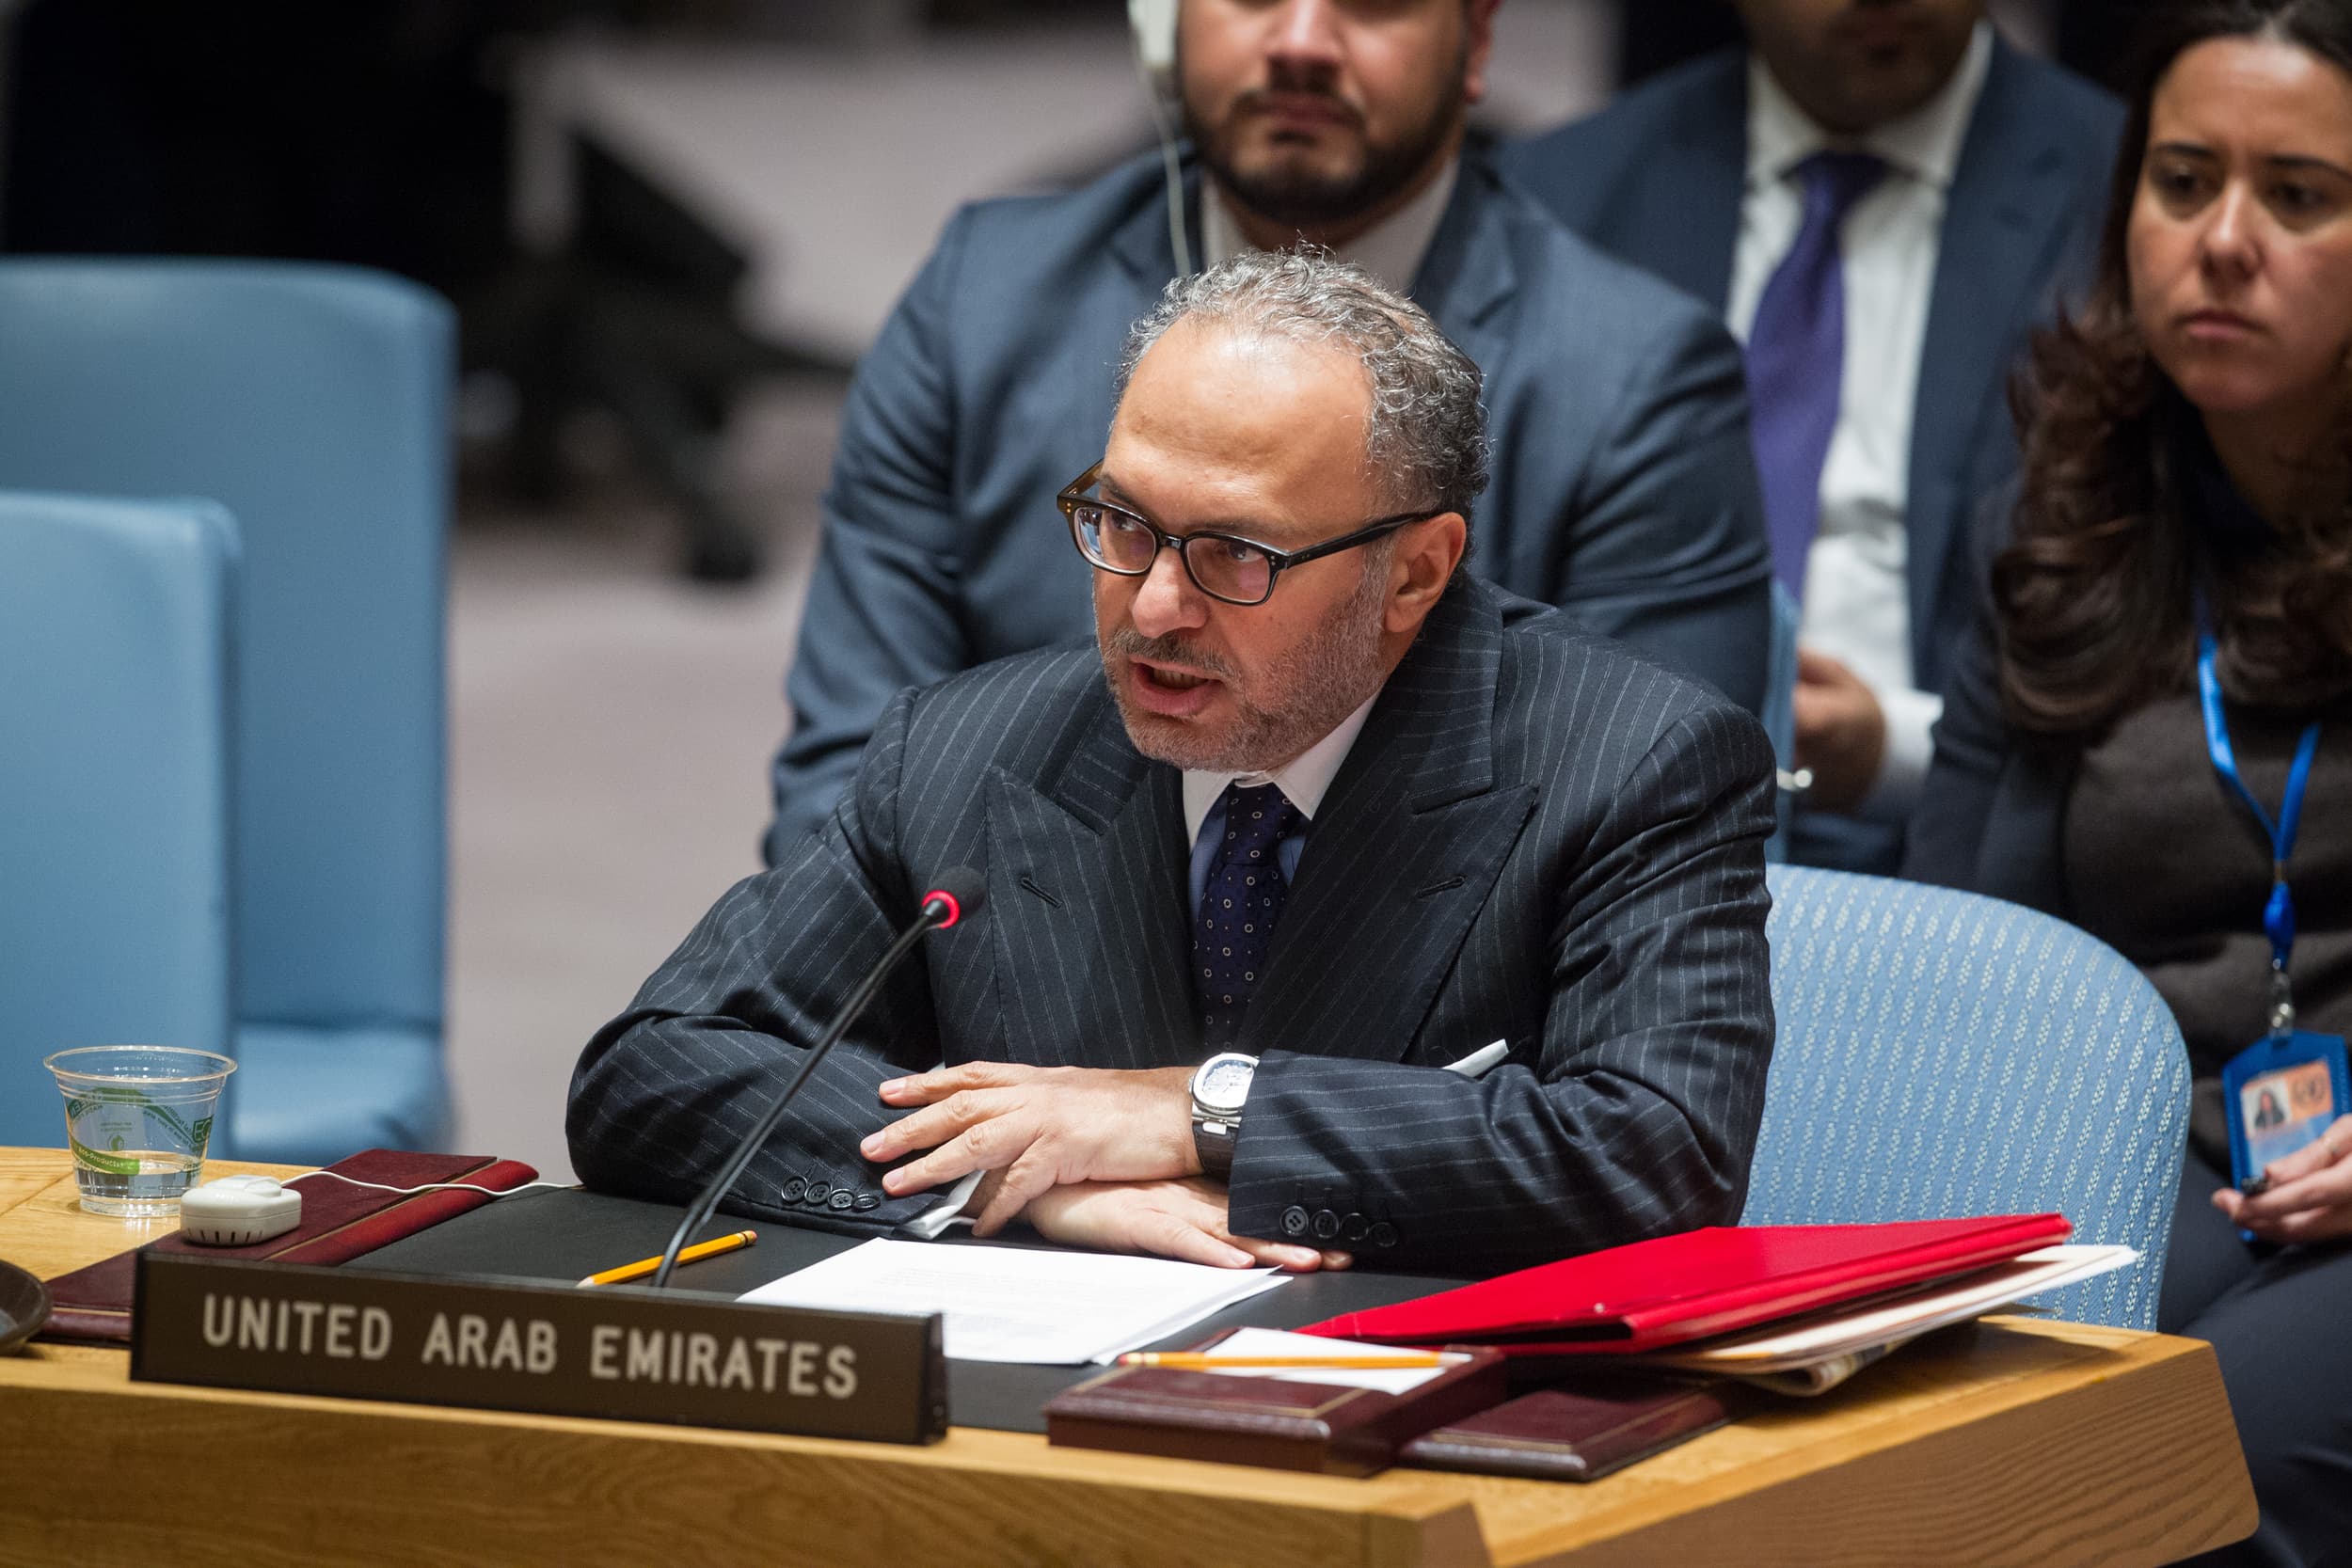 At the United Nations Security Council, UAE announced the launch of a new diplomatic initiative aimed to build international cooperation and dialogue through a "Contact Group on Countering Extremism". Read UAE Minister of State for Foreign Affairs, Dr. Anwar Gargash's "Maintaining International Peace and Security" statement here: http://ow.ly/JG2jk